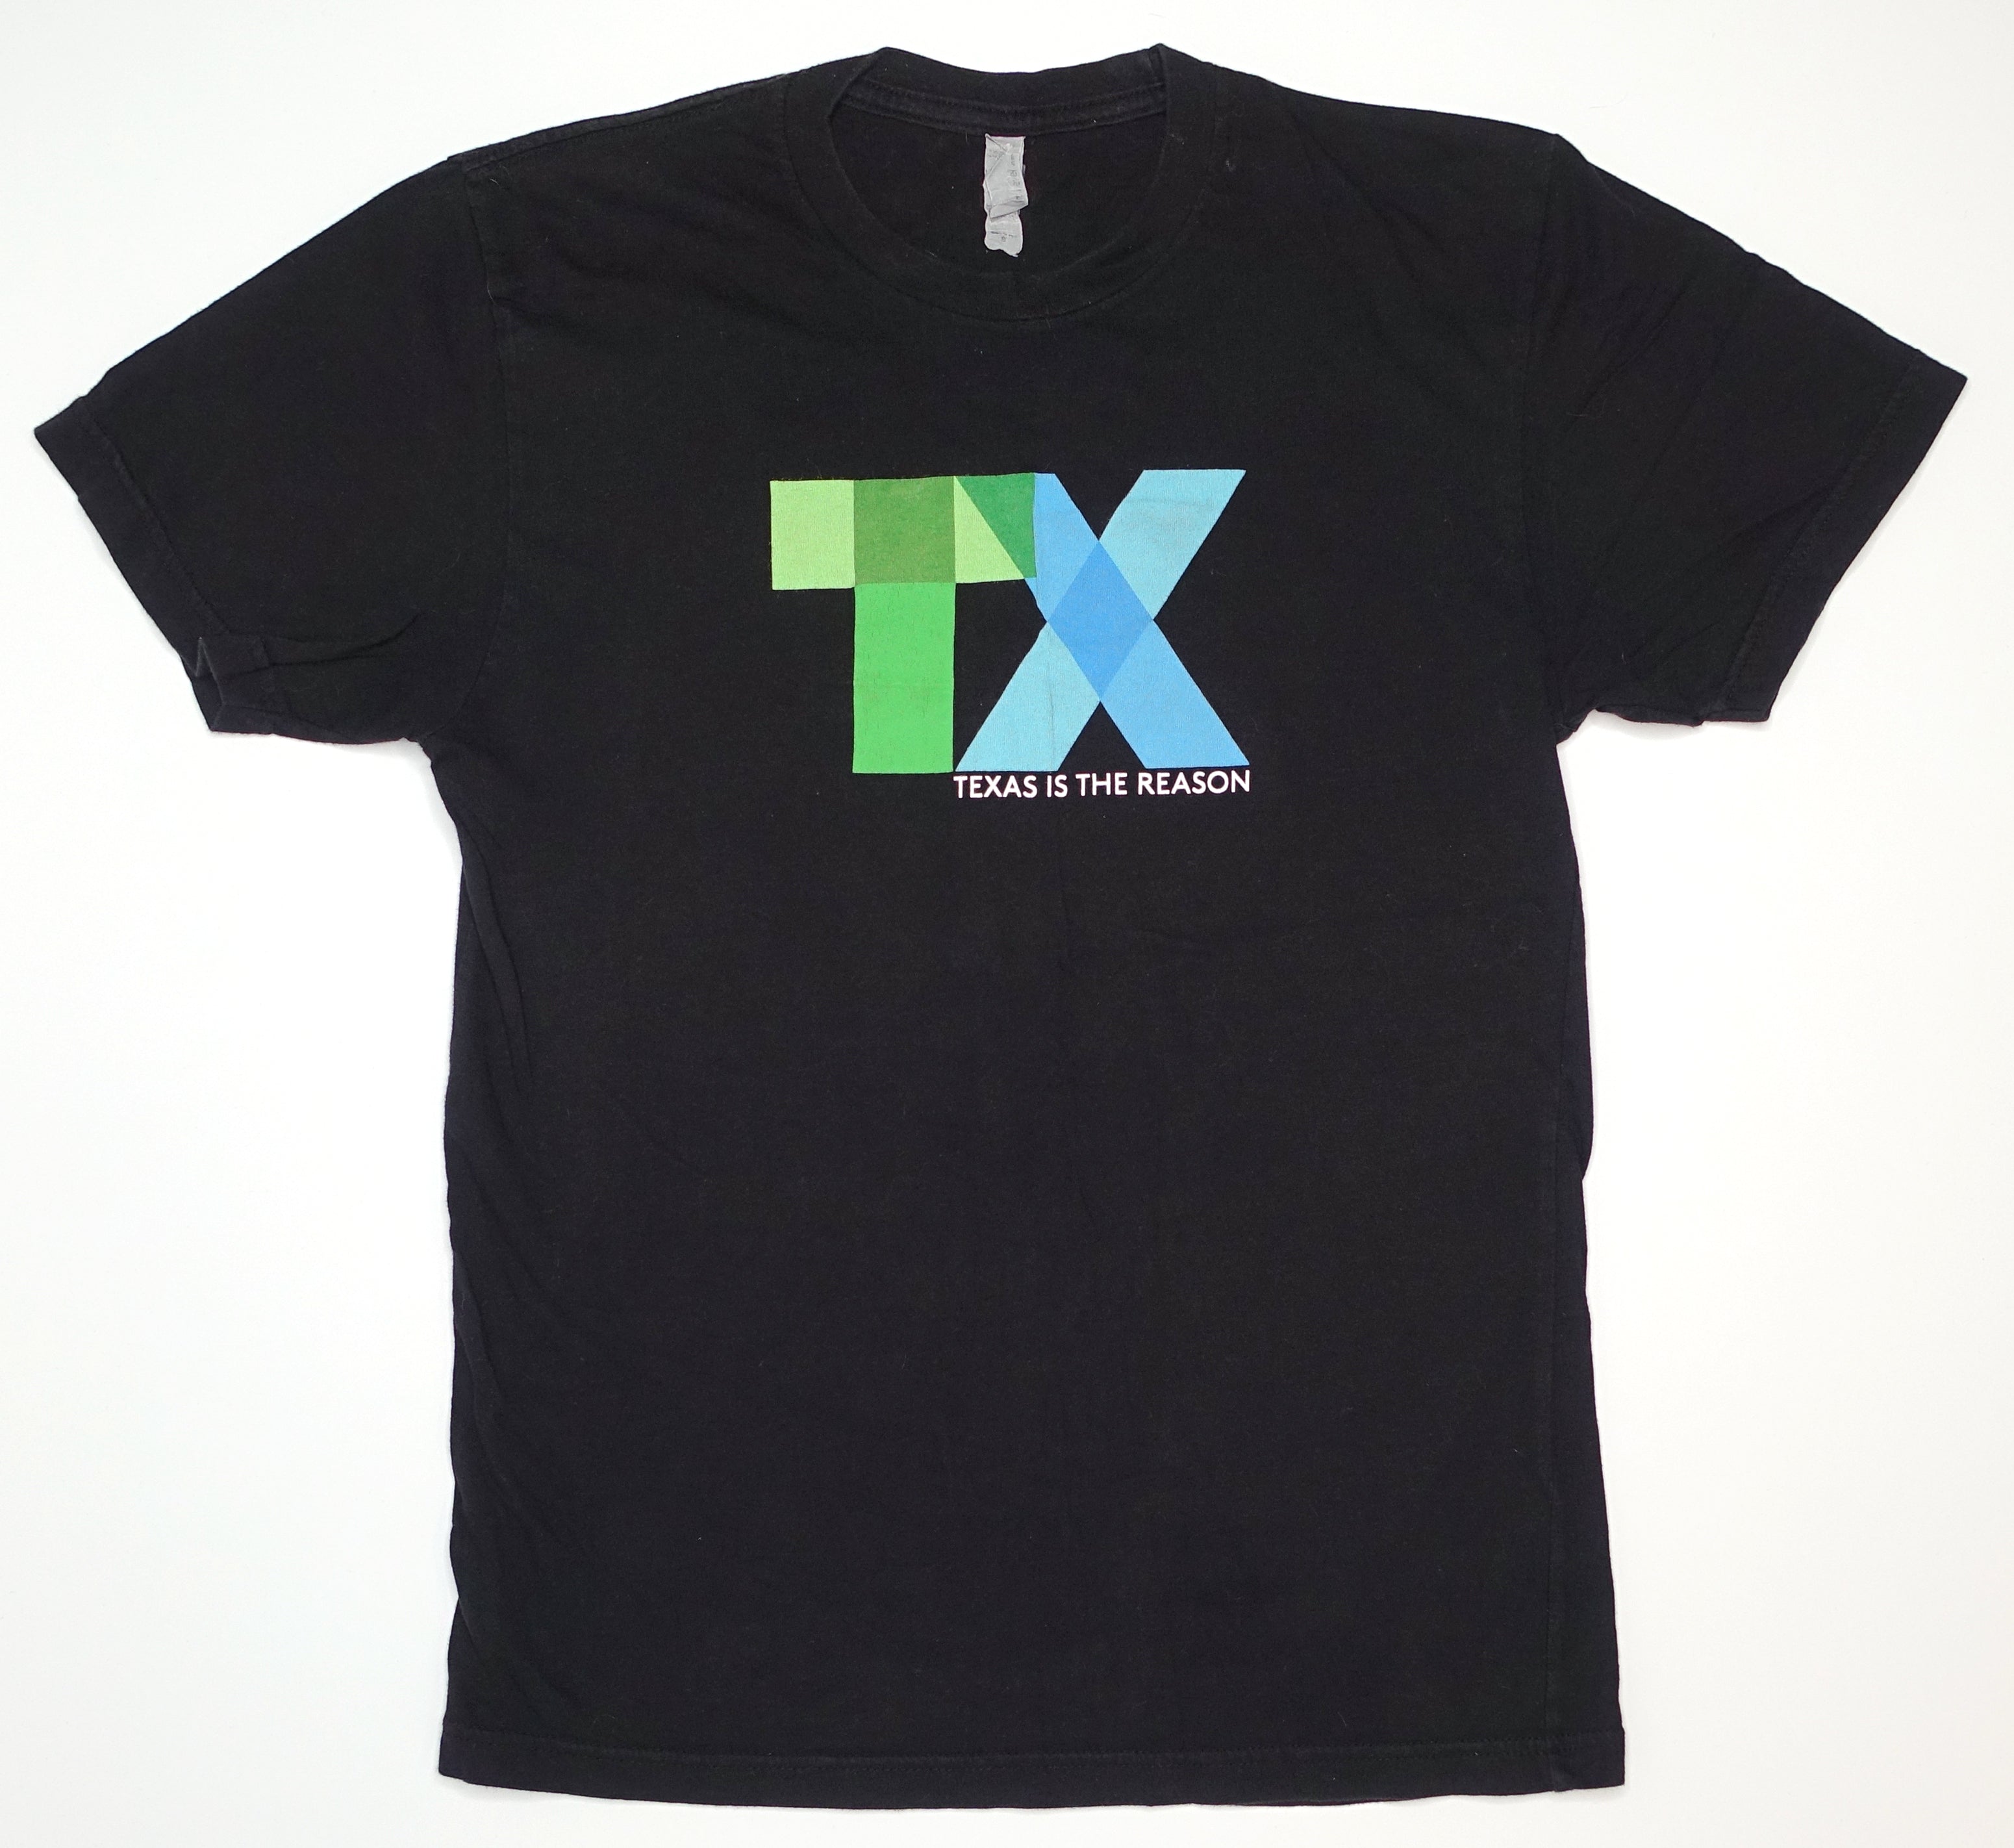 Texas Is The Reason - TX Multiply 2006 Reunion Tour Shirt Size Small